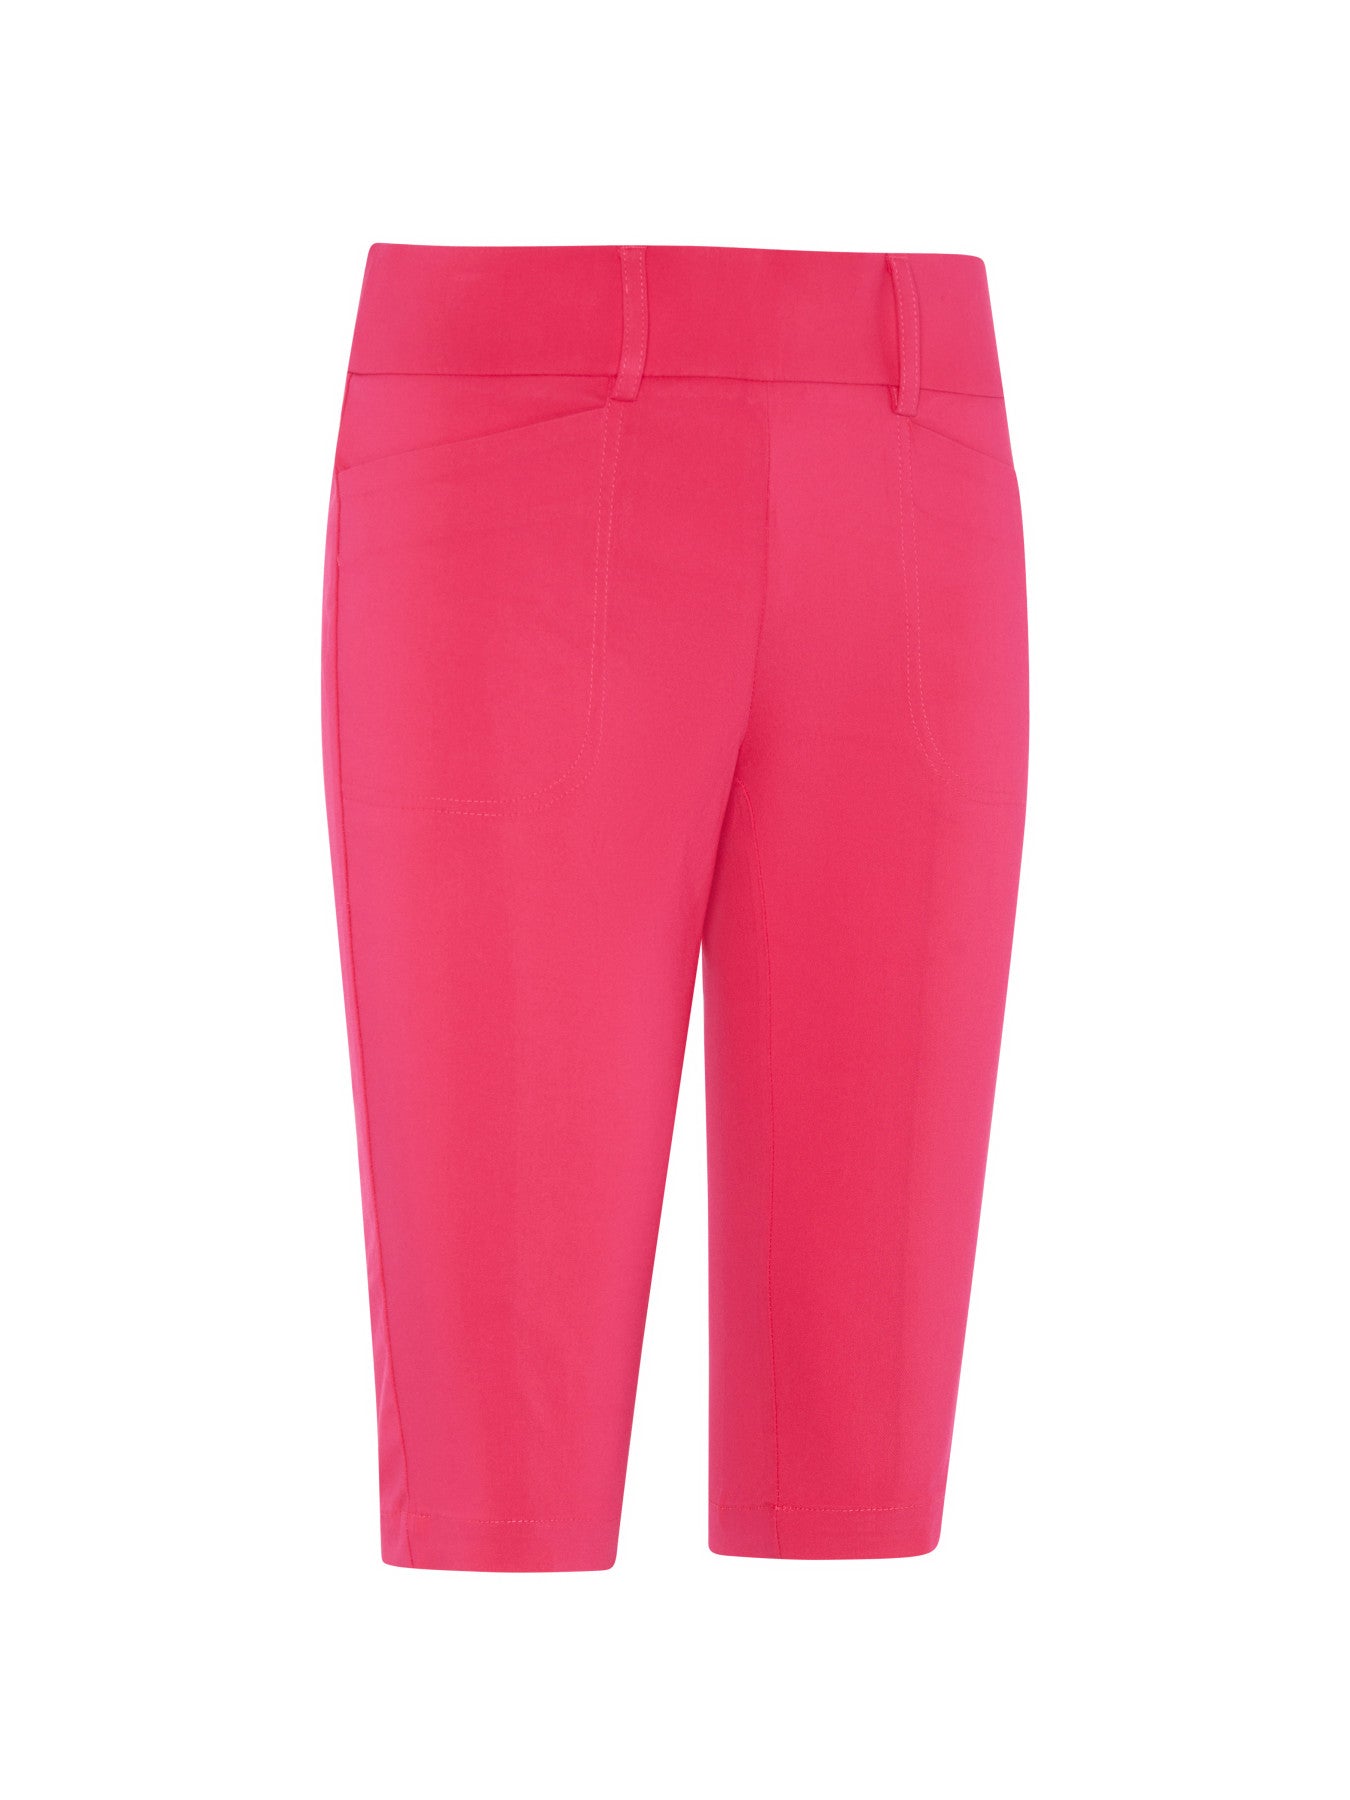 View Womens PullOn Stretch Tech Bermuda Golf Shorts In Pink Peacock information